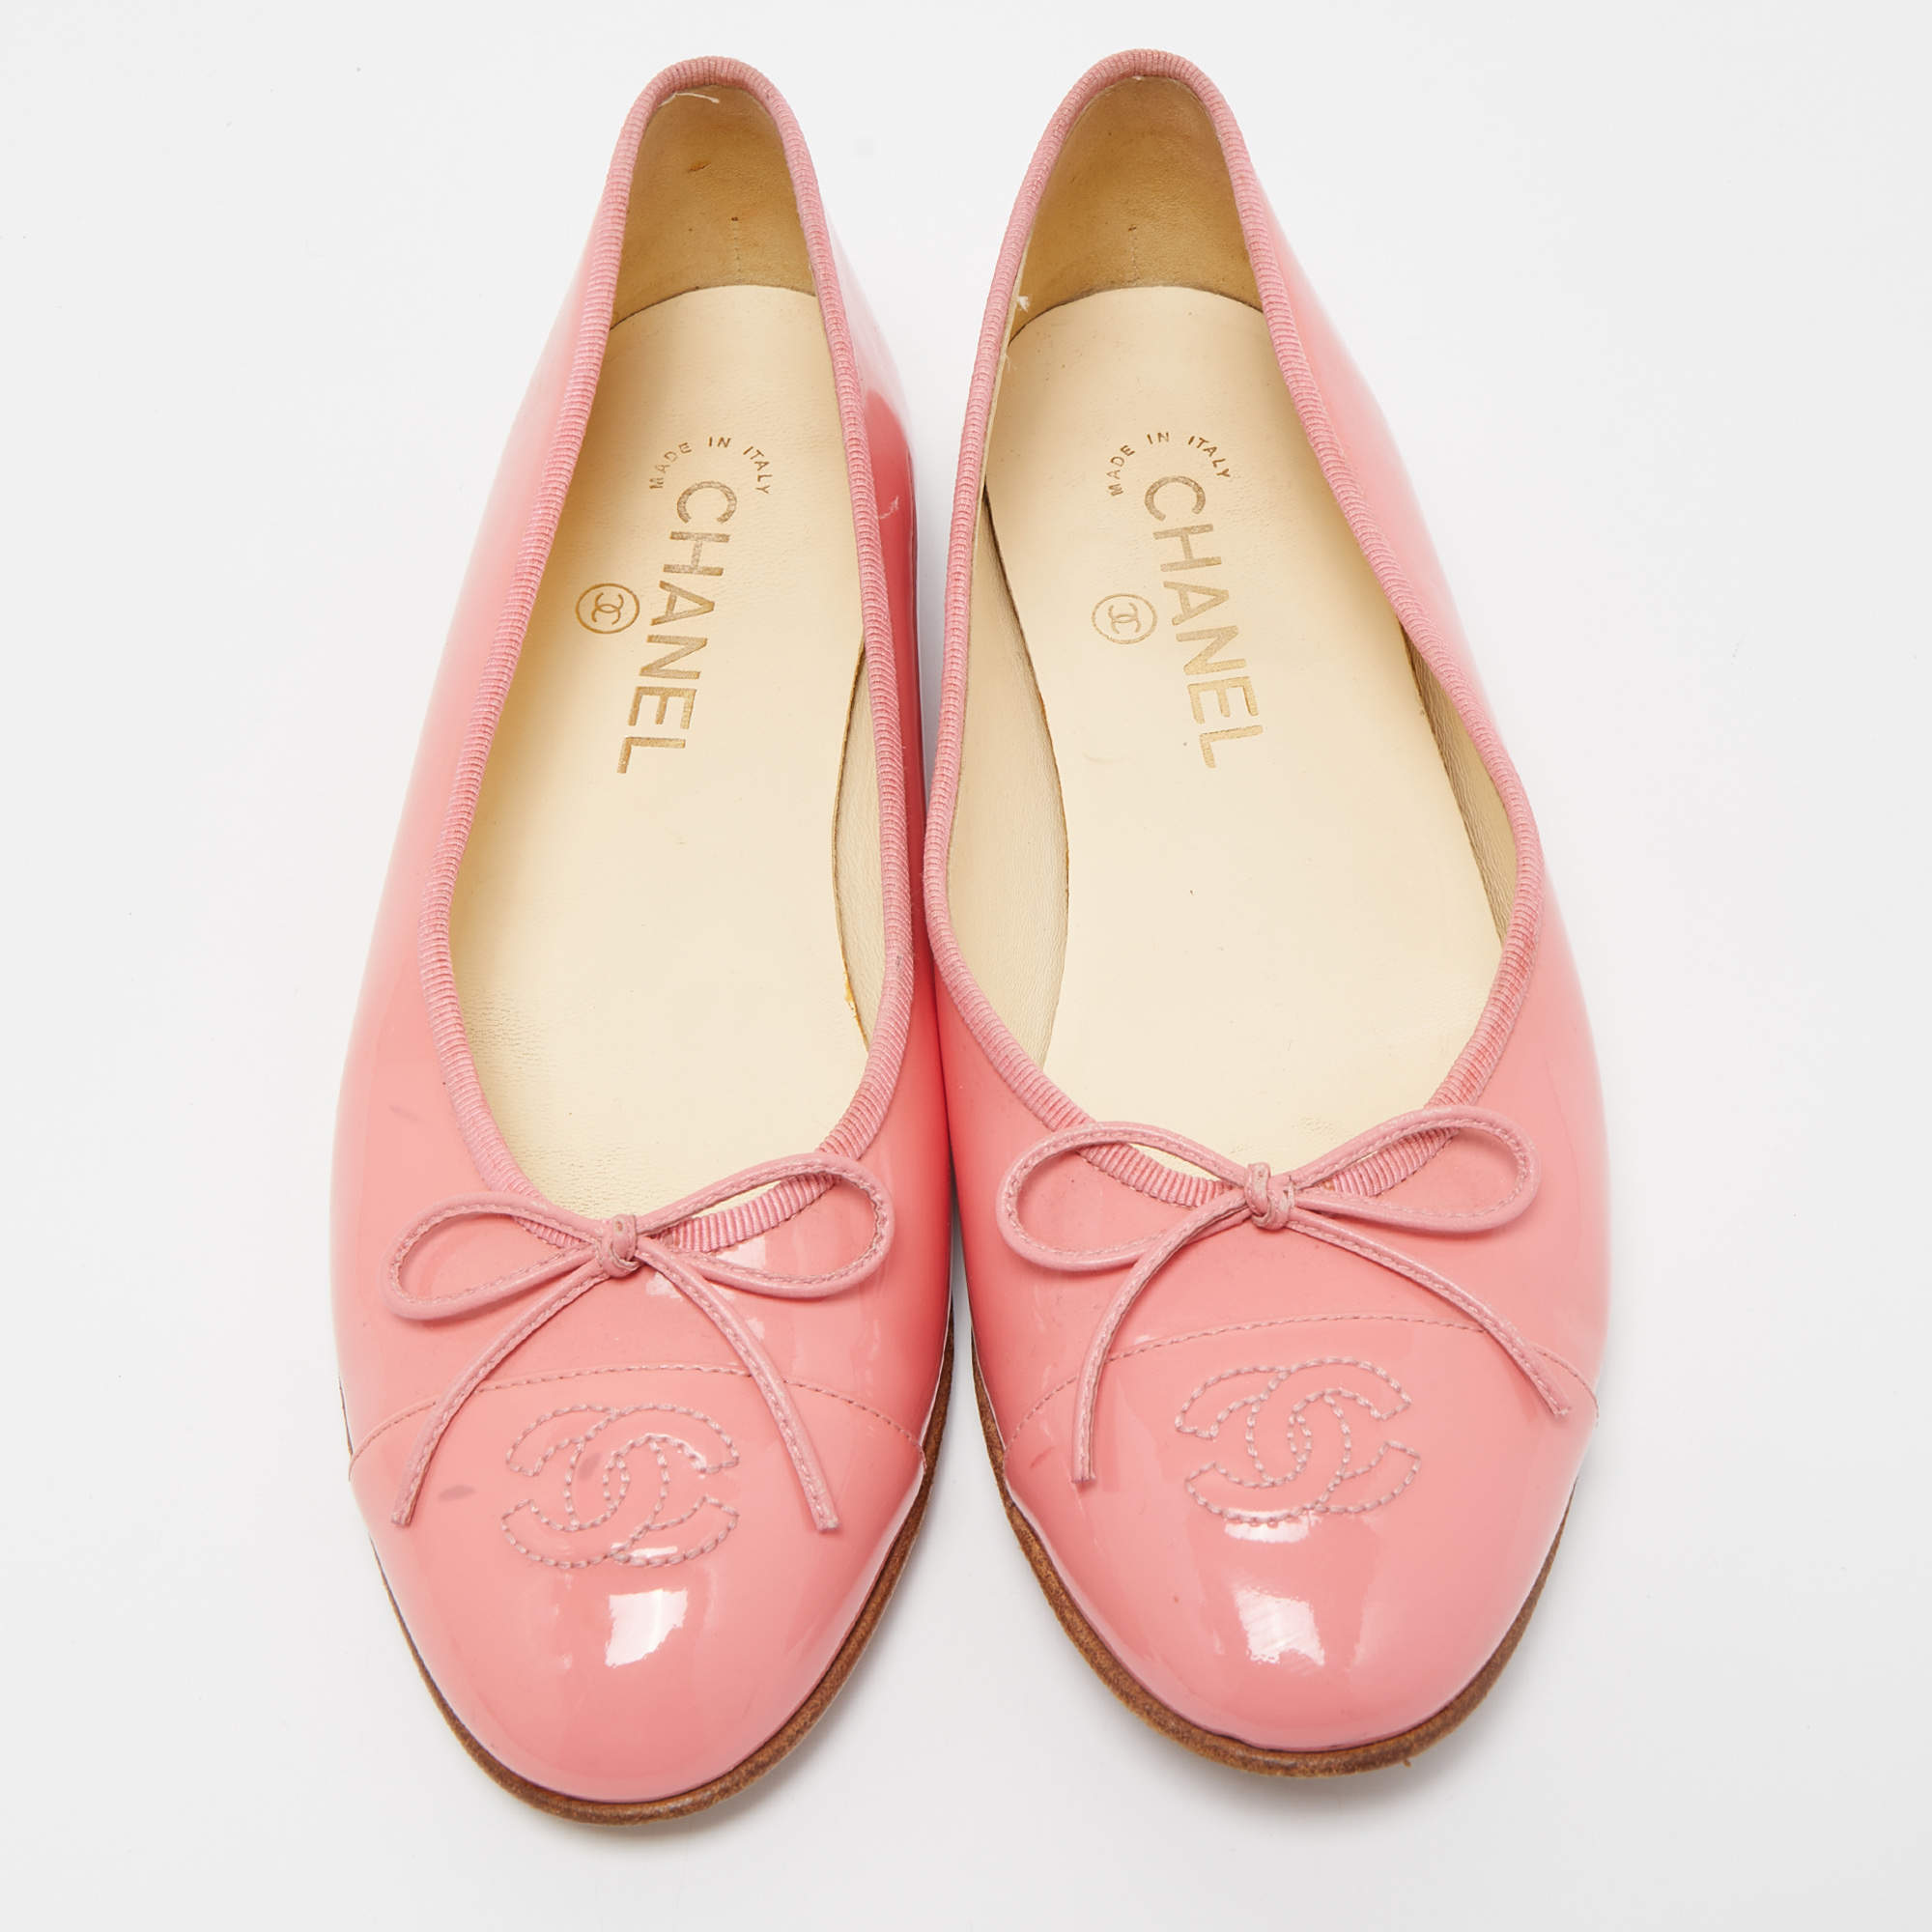 Chanel Pink Patent Leather CC Cap Toe Bow Ballet Flats Size 38.5 Chanel